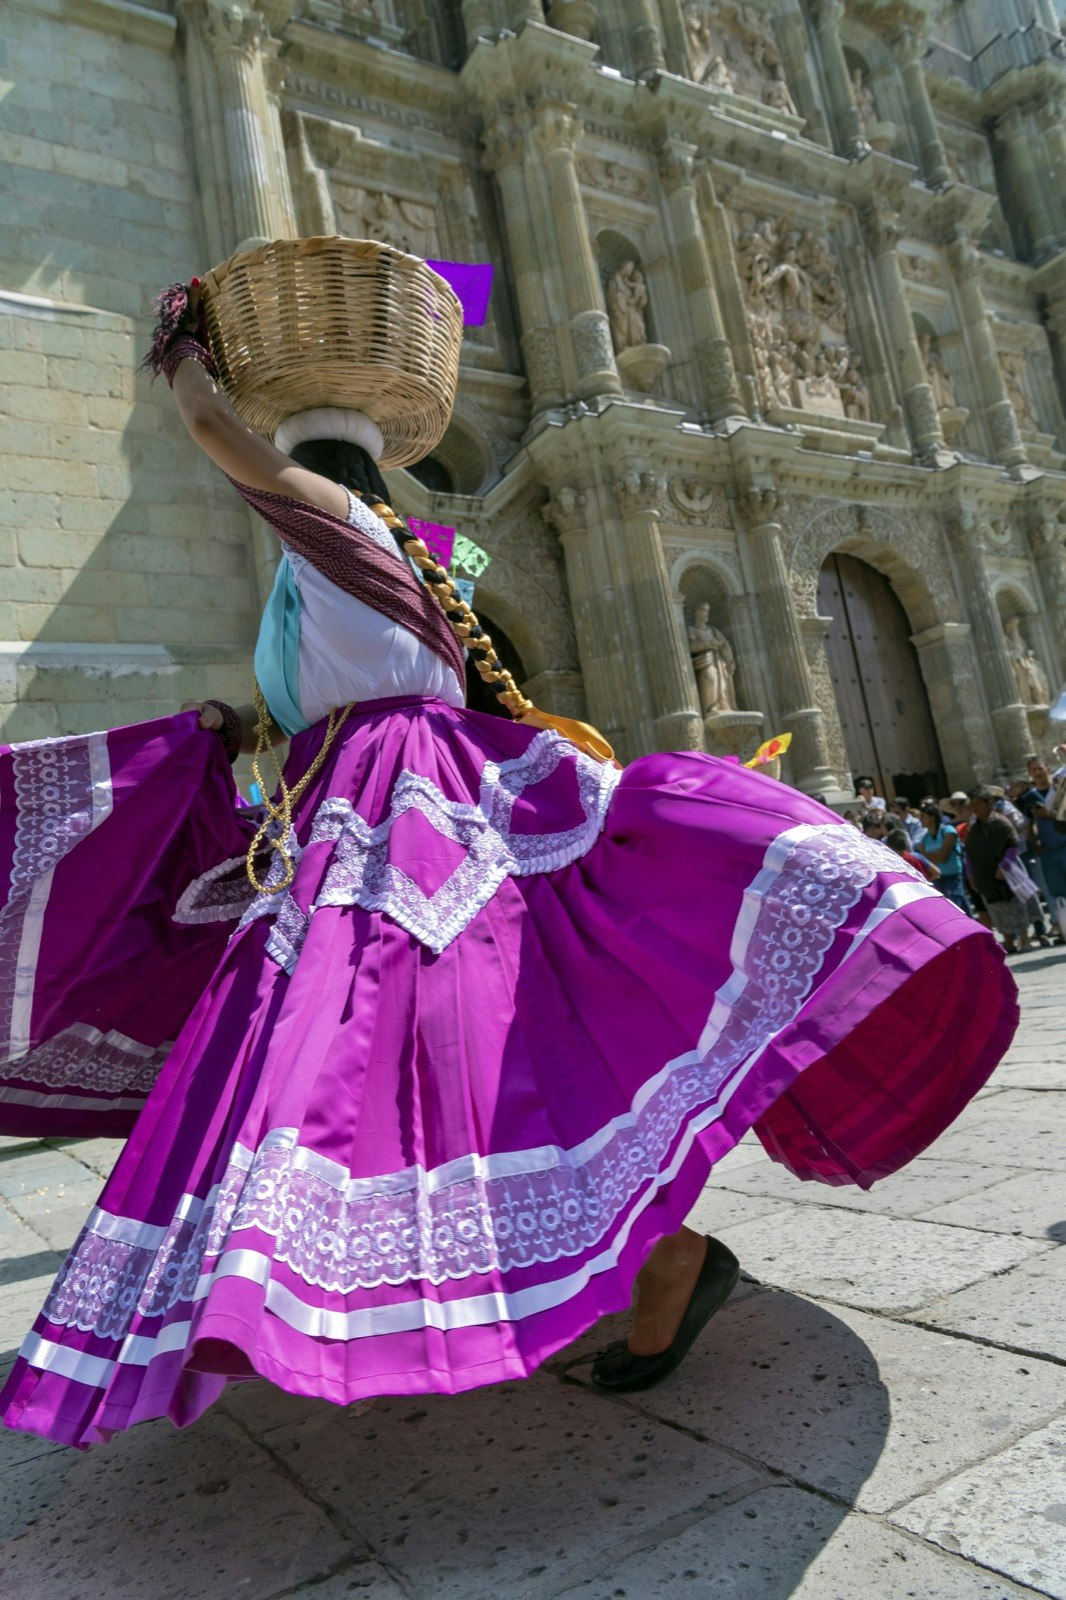 A woman holds a woven basket on her head as she spins in her vibrant purple and white traditional flared skirt in the middle of a town square; Dia de Muertos